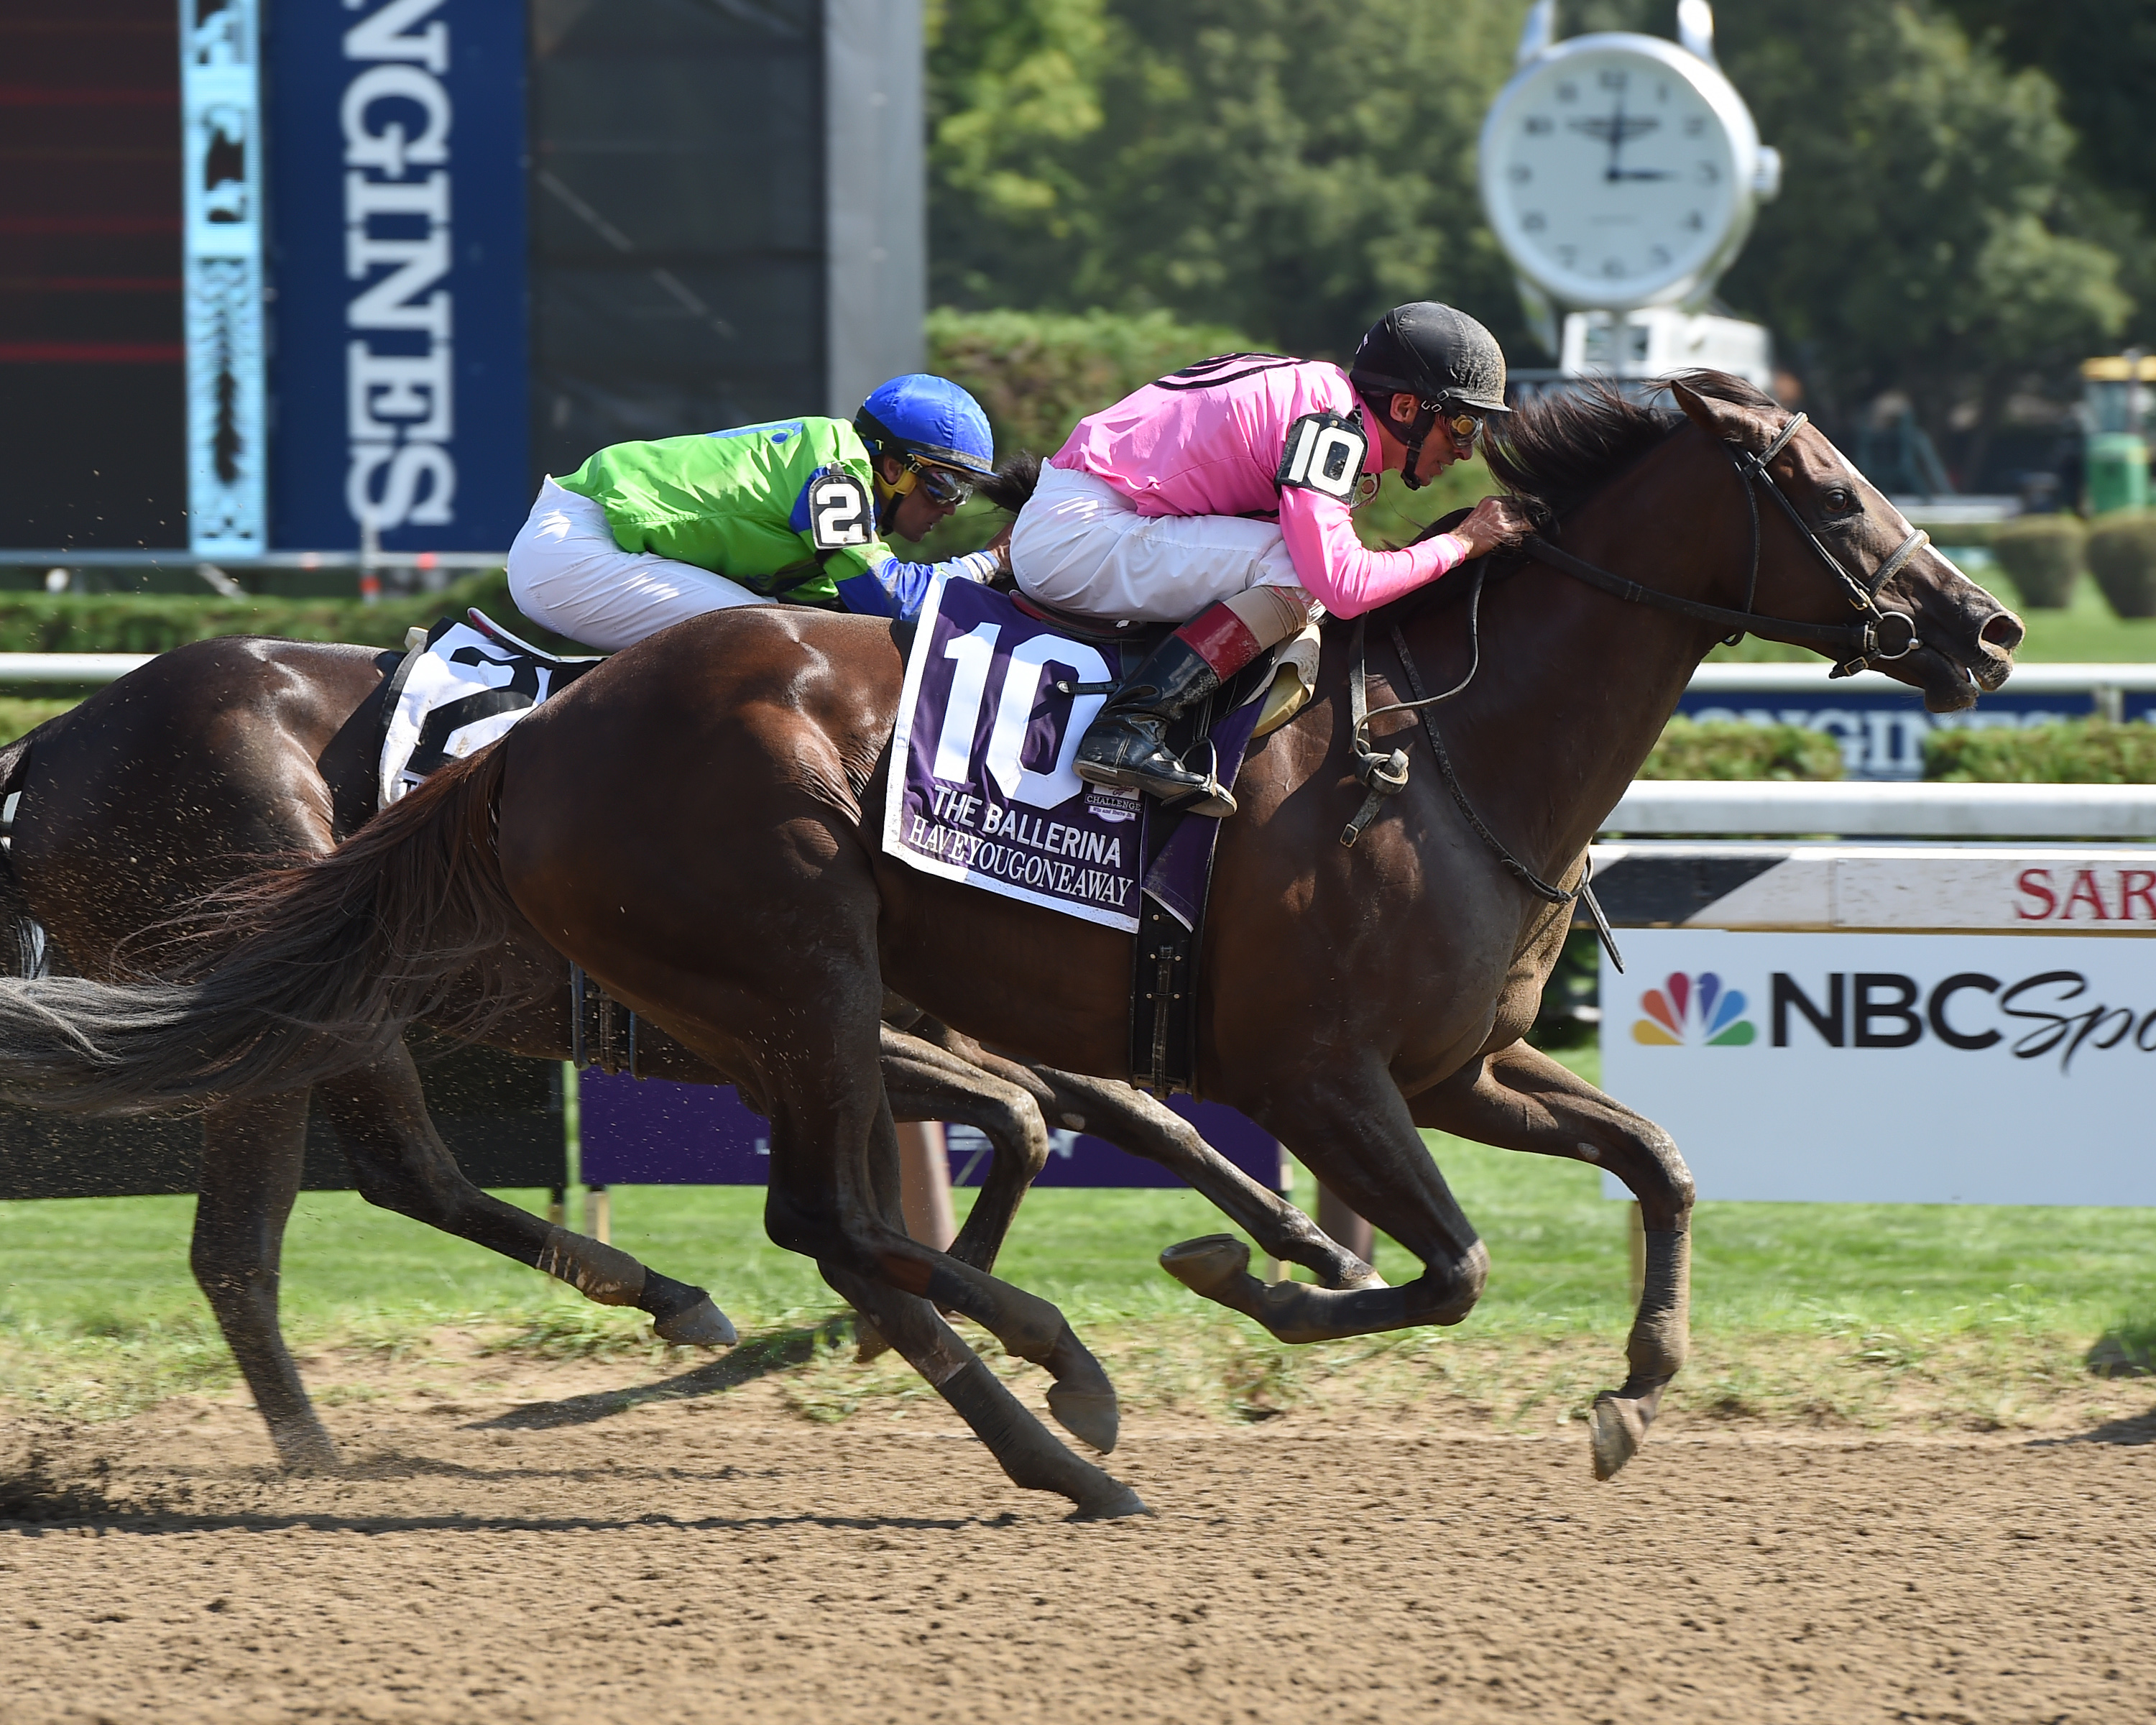 Haveyougoneaway wins the Ballerina at Saratoga. She now heads to Santa Anita on November 5 in the Breeders’ Cup Filly & Mare Sprint. Photo: NYRA.com